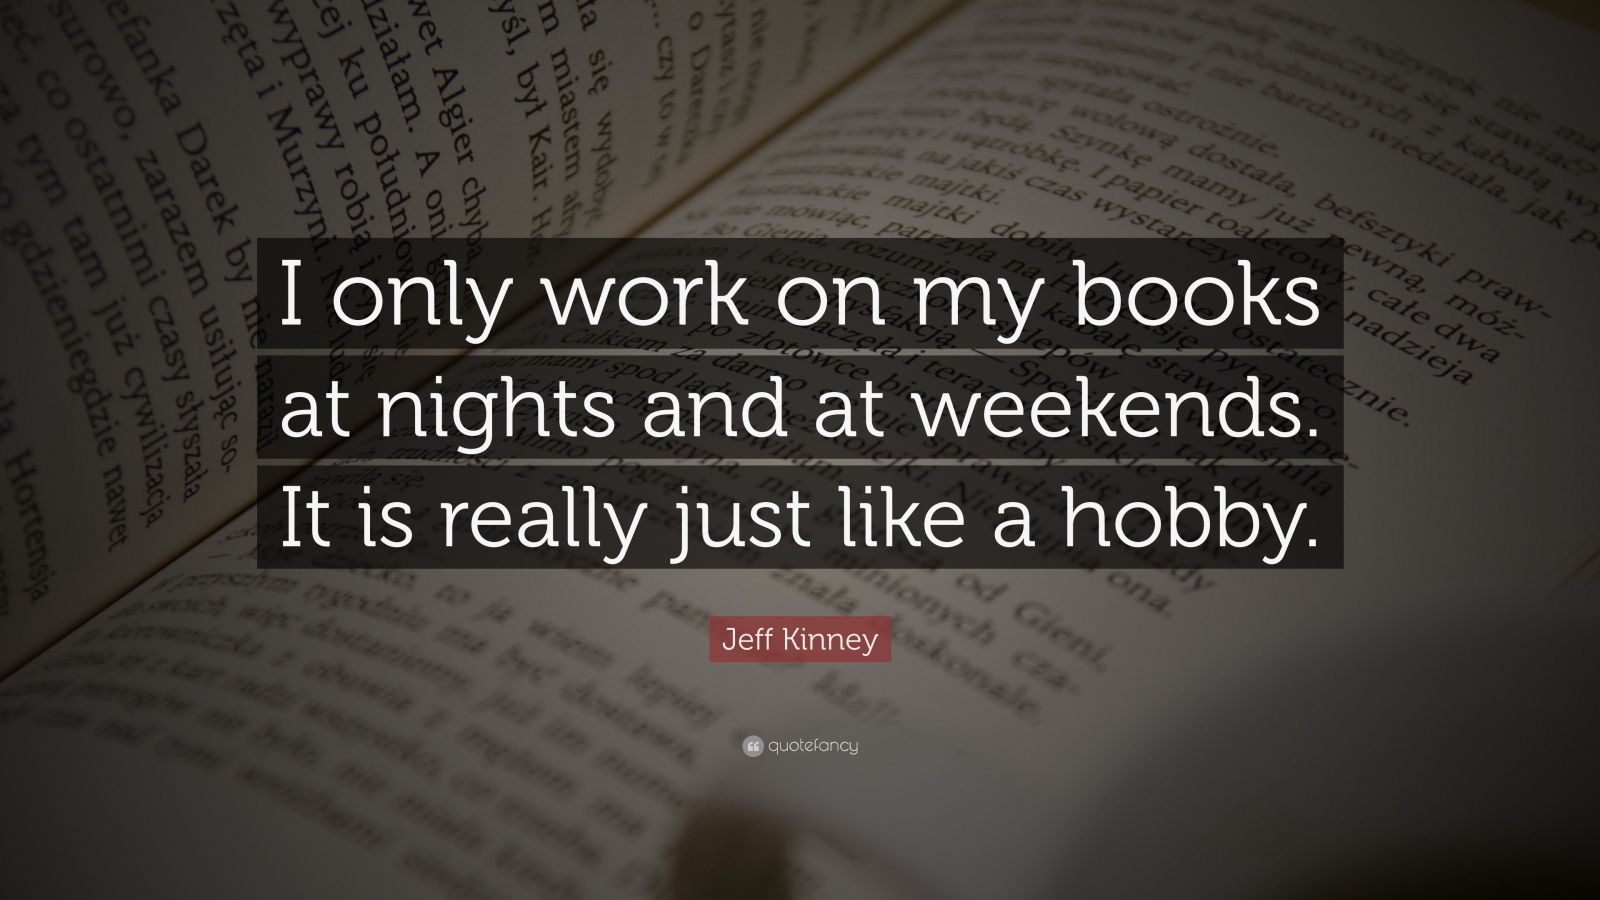 Jeff Kinney Quote: “I only work on my books at nights and at weekends